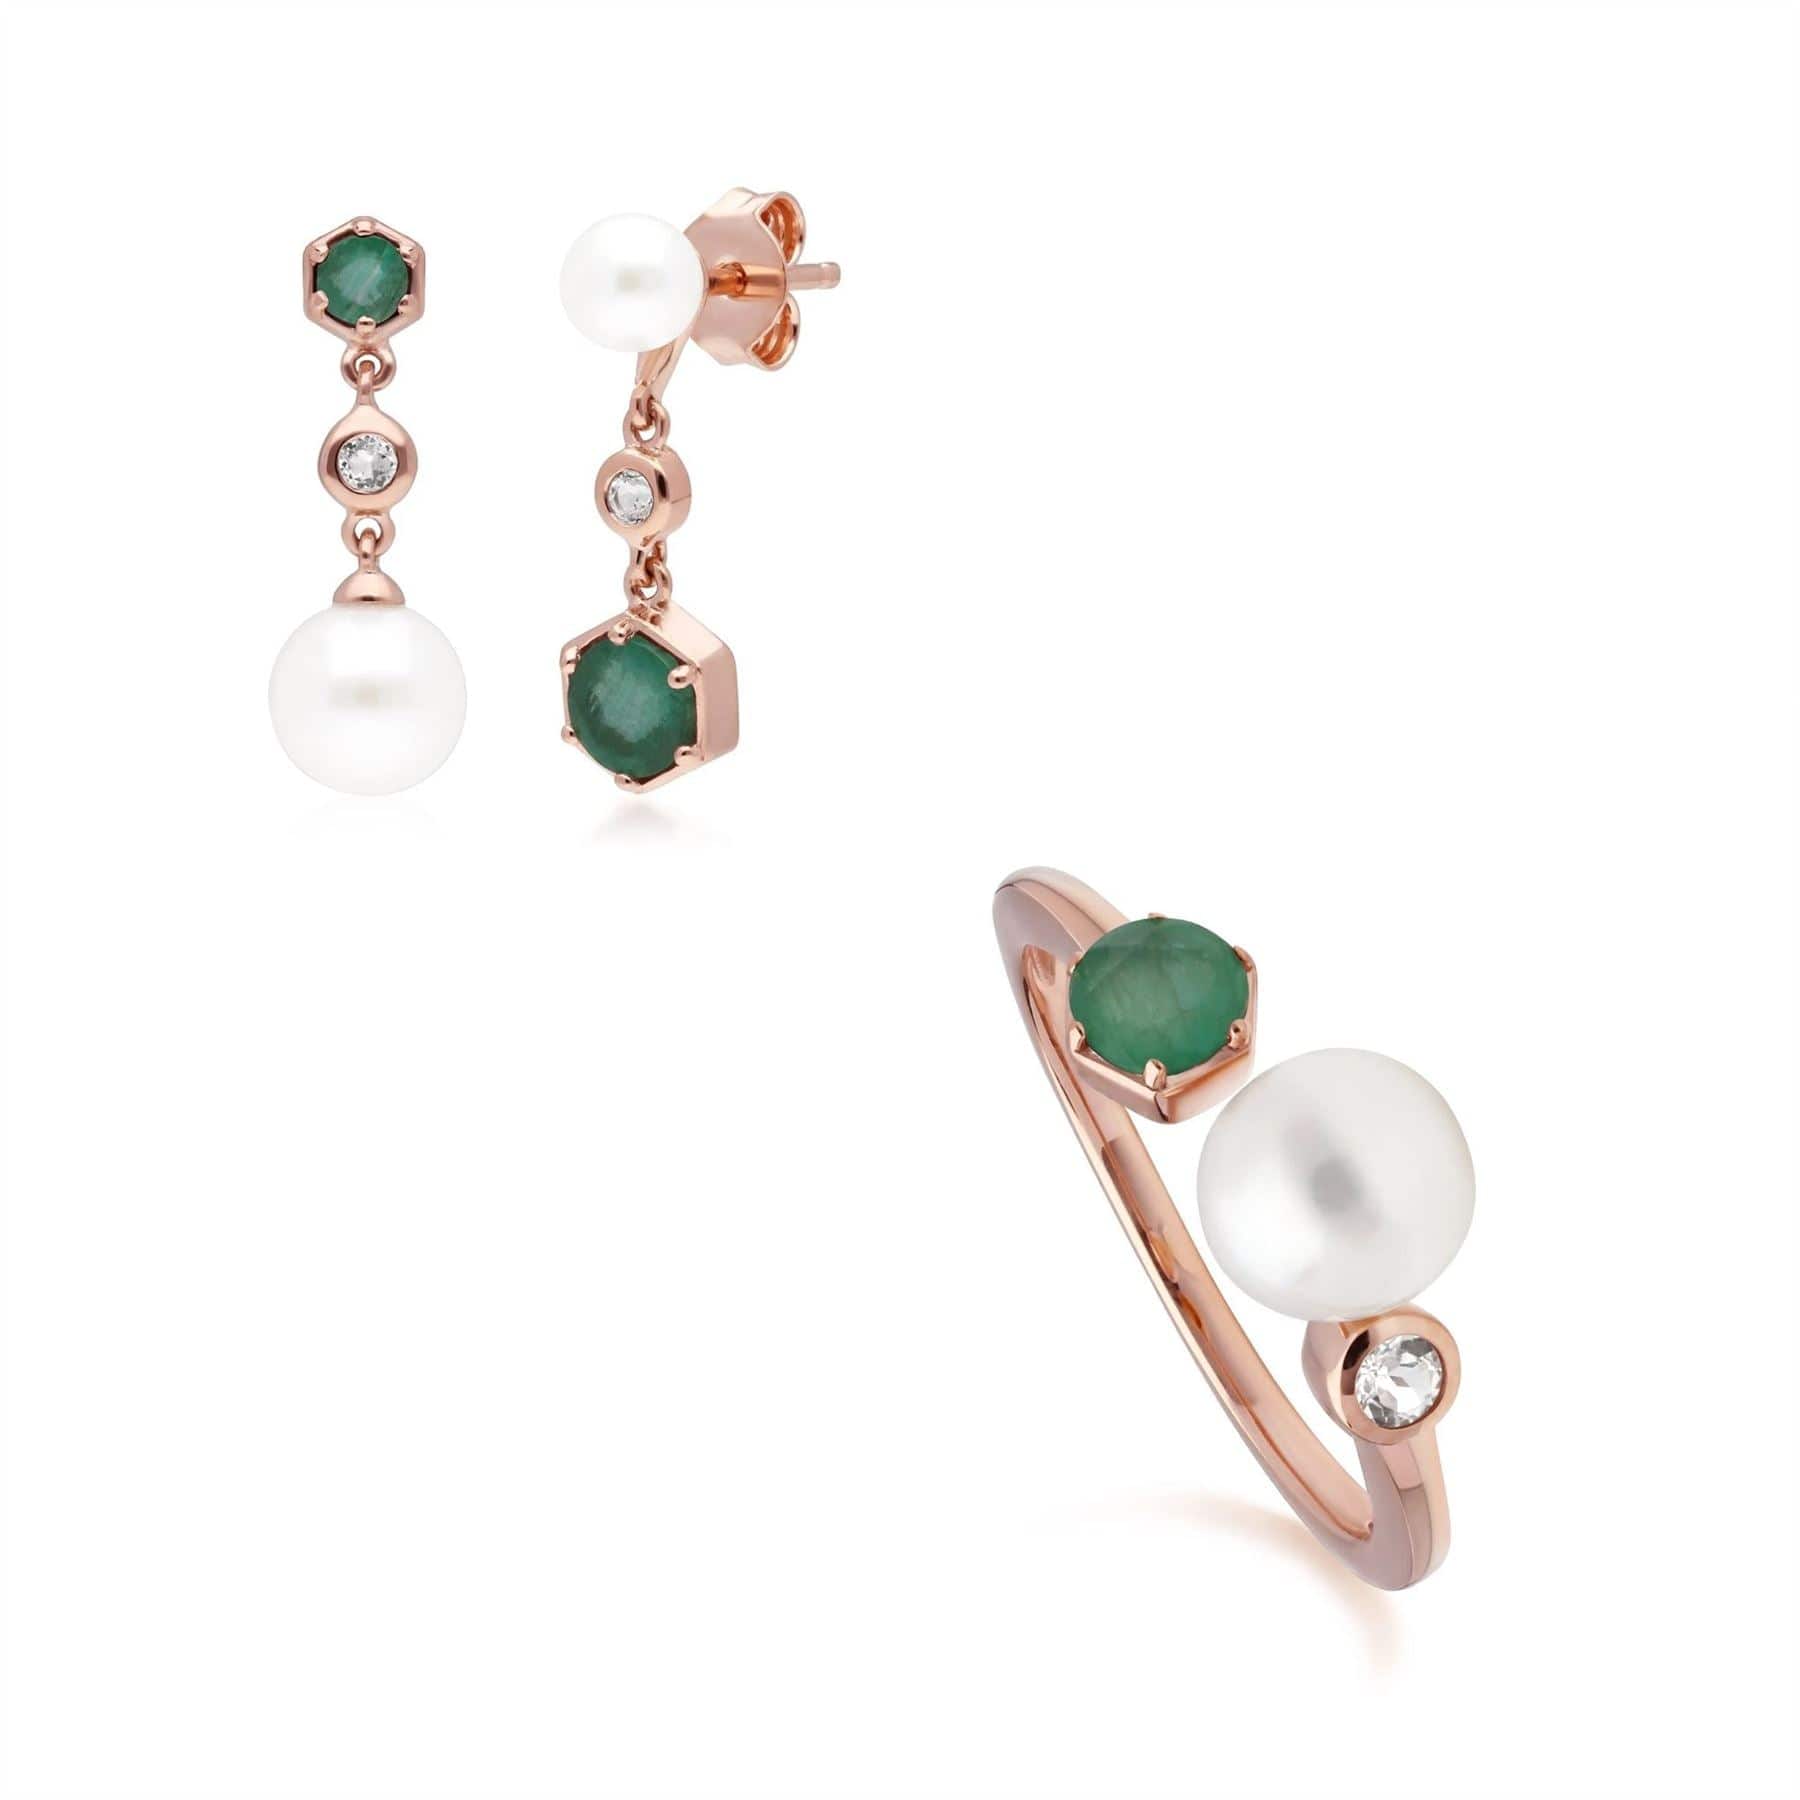 270E030303925-270R058803925 Modern Pearl, Emerald & Topaz Earring & Ring Set in Rose Gold Plated Silver 1